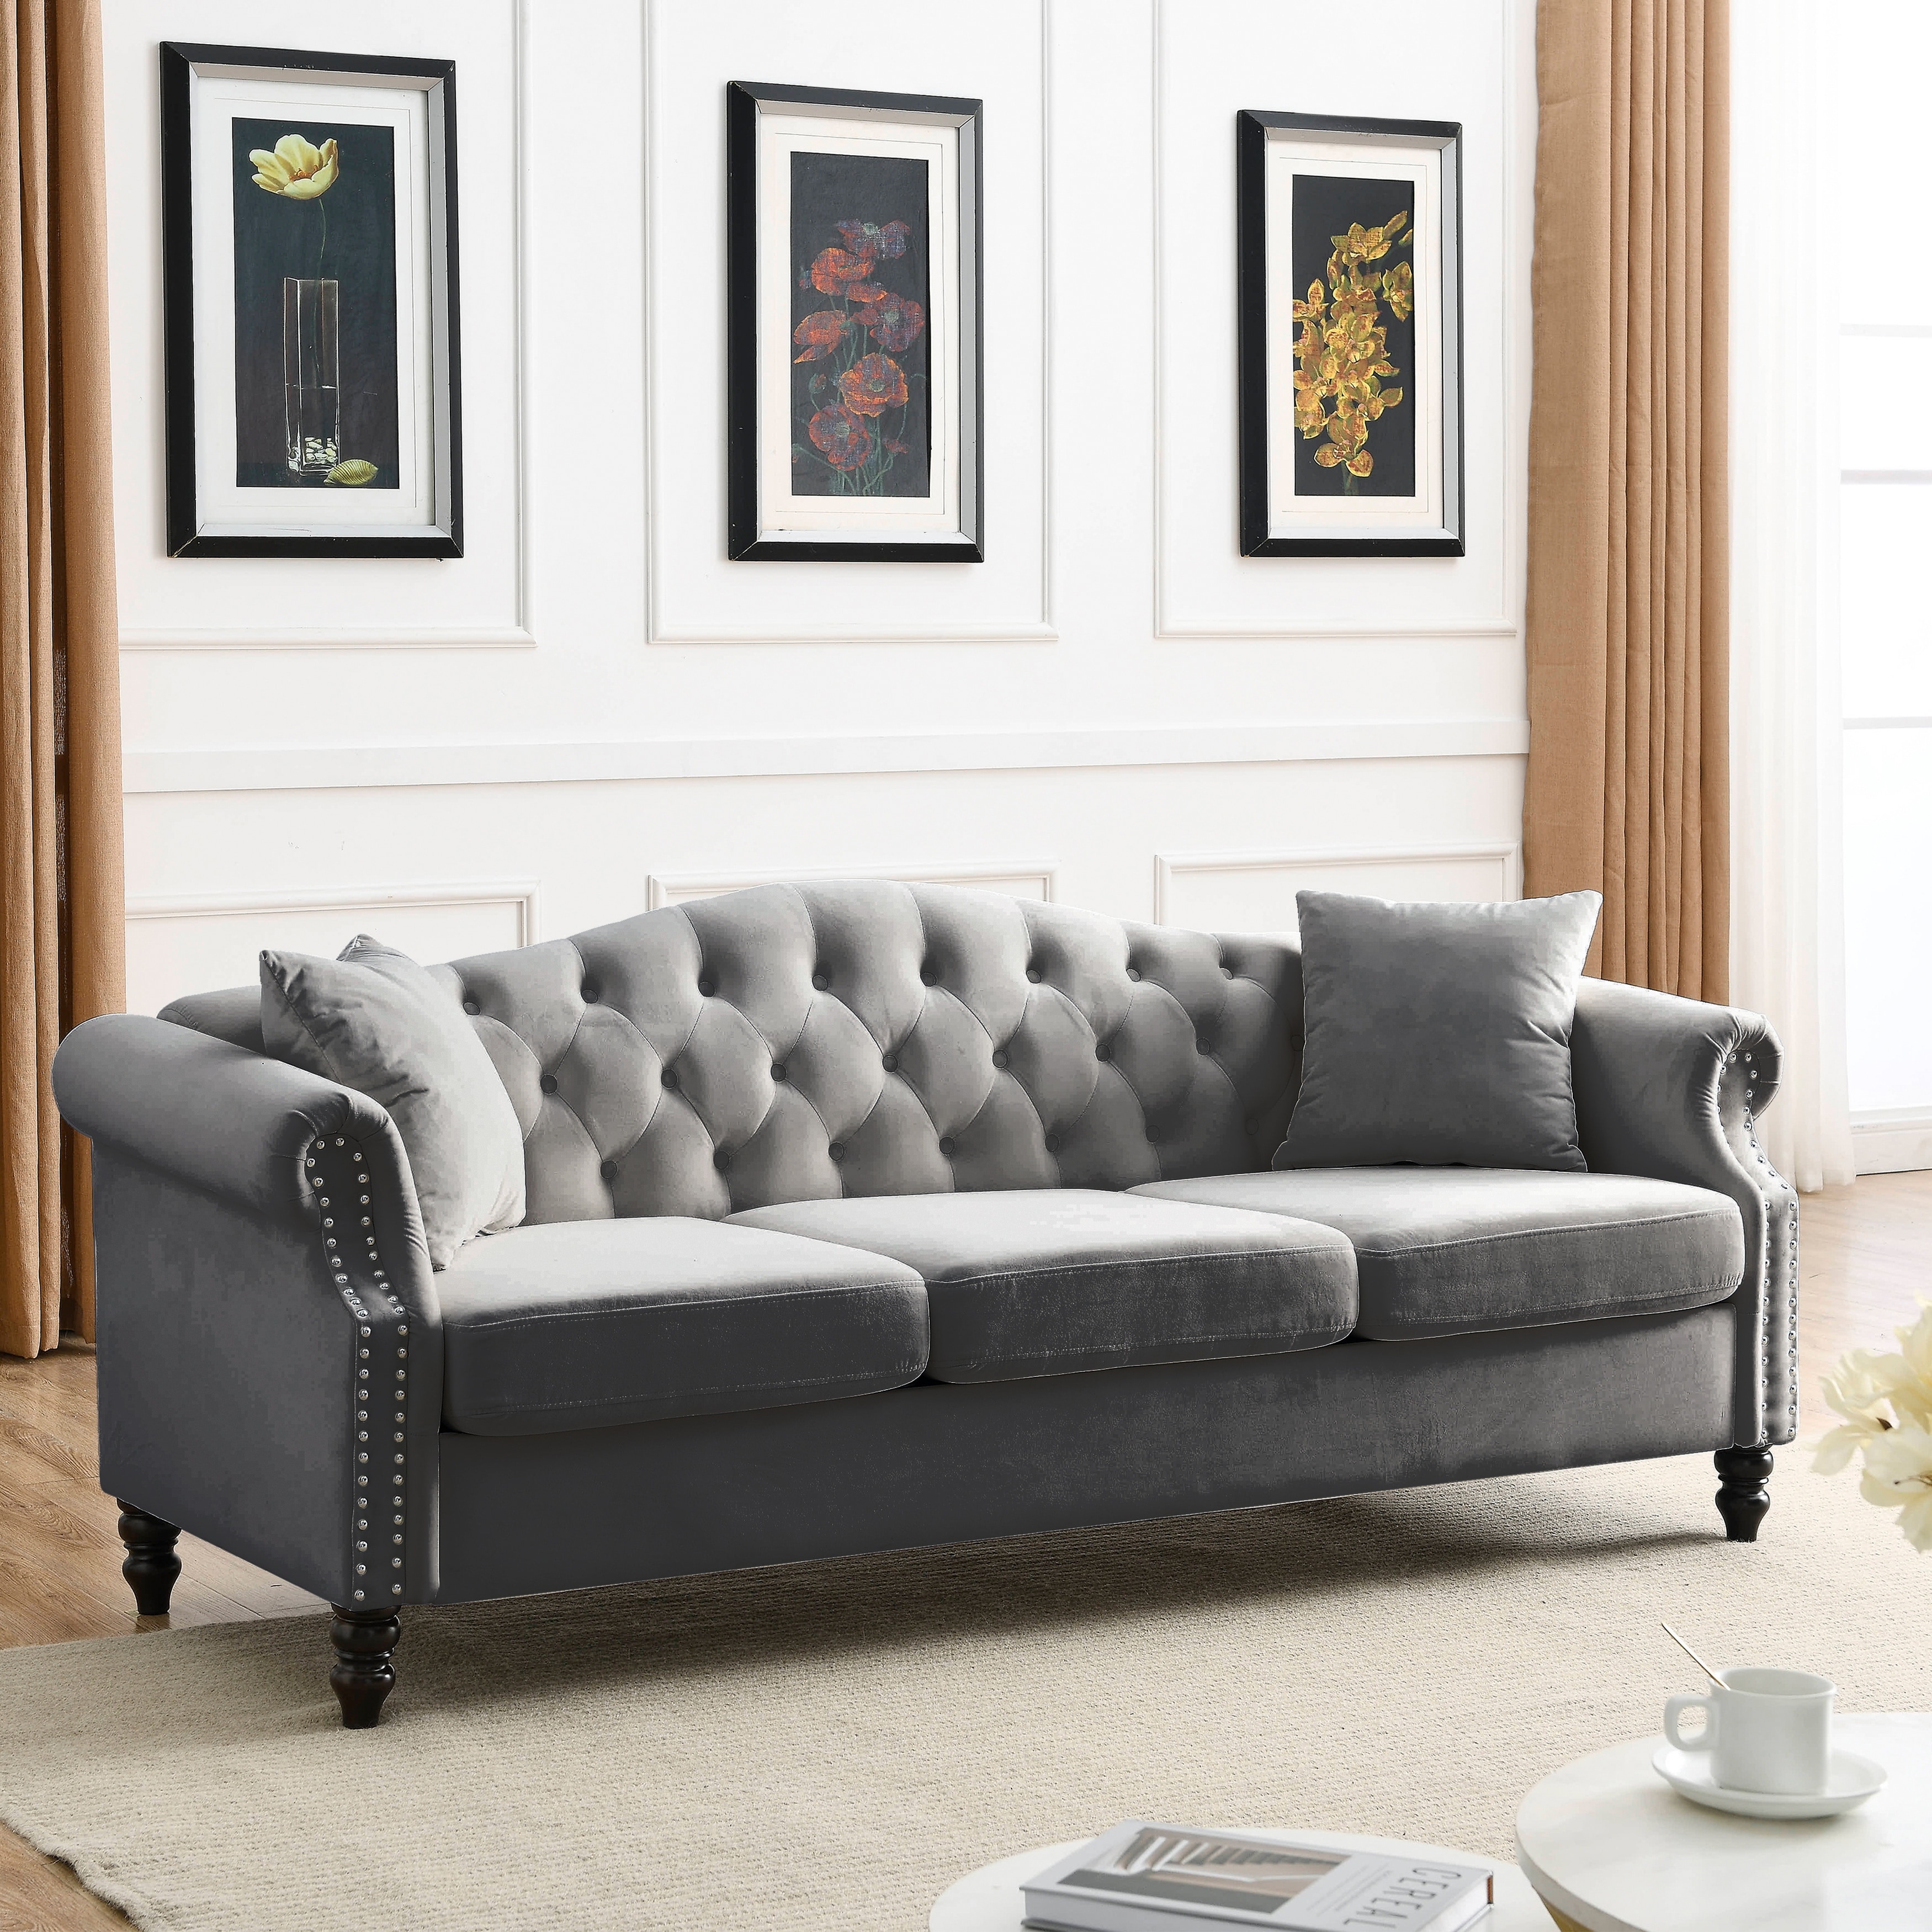 https://ak1.ostkcdn.com/images/products/is/images/direct/4bad79ce490d081868232bc49877e70ce34c5125/79-inch-3-Seater-Chesterfield-Camel-Back-Sofa%2C-Classic-Tufted-Sofa-Velvet-Fabric-Couch-with-Rolled-Arms-and-Nailhead%2C-2-Pillows.jpg